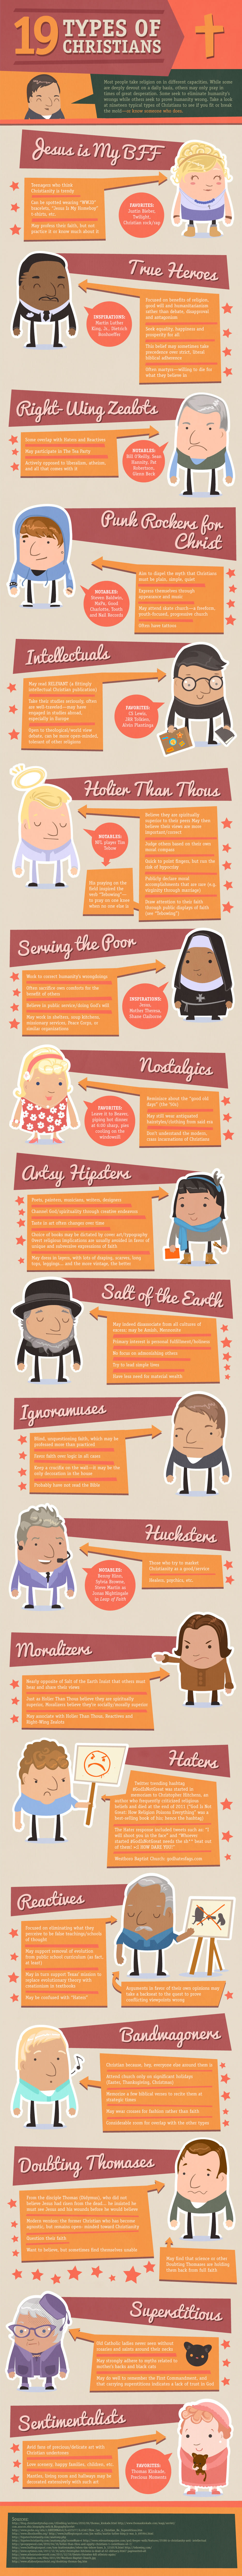 19 Types of Christians